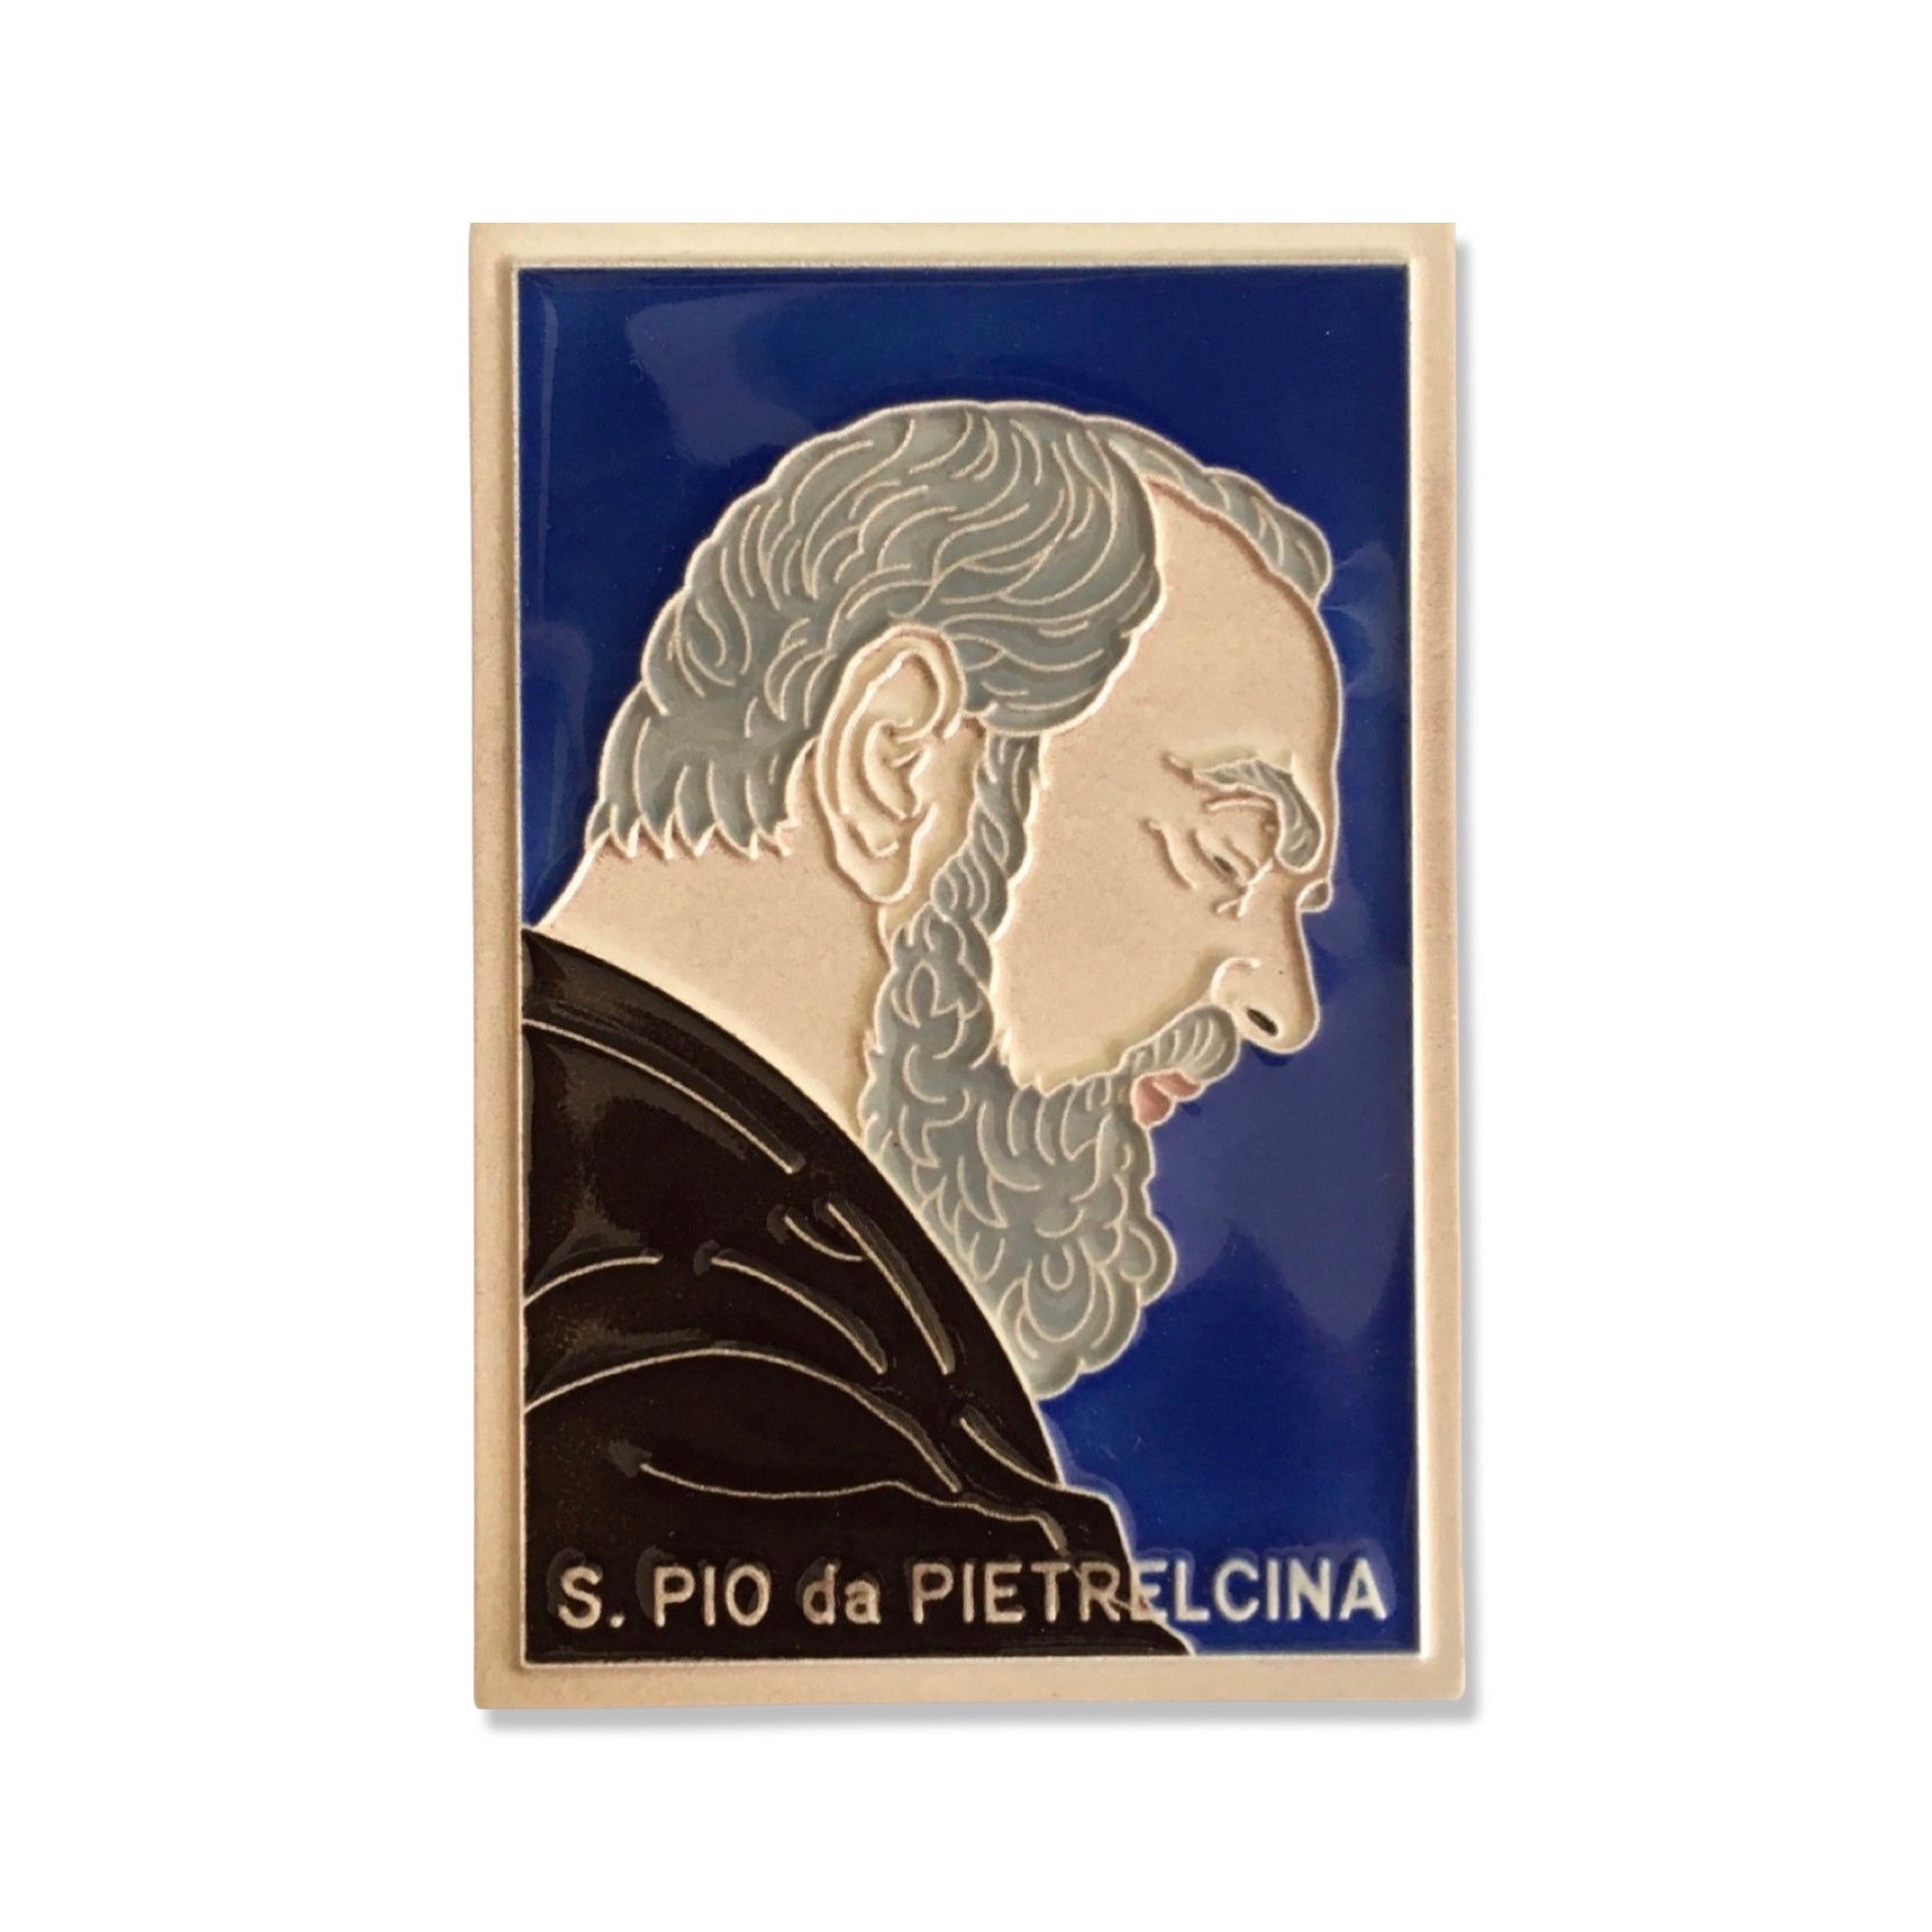 Decorative Padre Pio Tile, ceramics, pottery, italian design, majolica, handmade, handcrafted, handpainted, home decor, kitchen art, home goods, deruta, majolica, Artisan, treasures, traditional art, modern art, gift ideas, style, SF, shop small business, artists, shop online, landmark store, legacy, one of a kind, limited edition, gift guide, gift shop, retail shop, decorations, shopping, italy, home staging, home decorating, home interiors